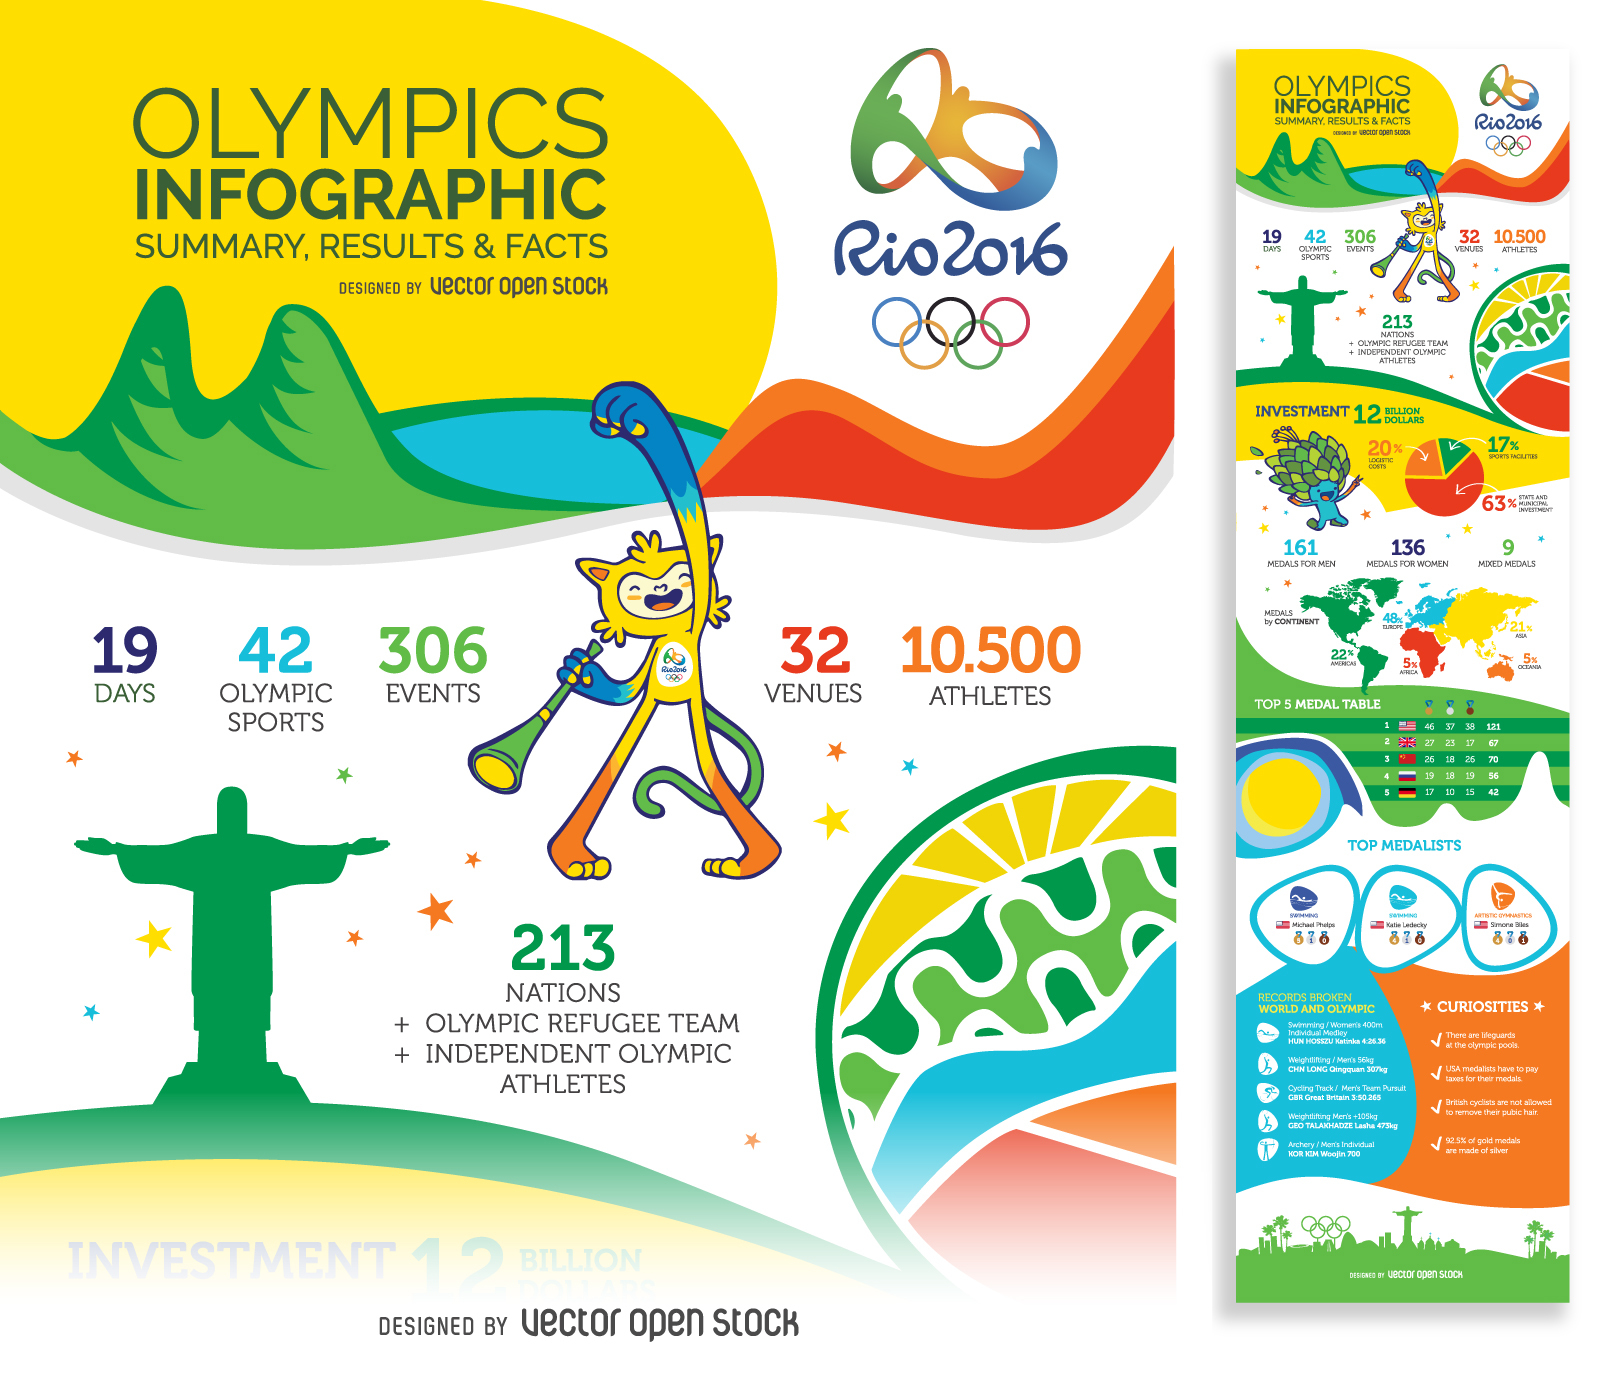 Rio 2016 Olympic Games final summary infographic